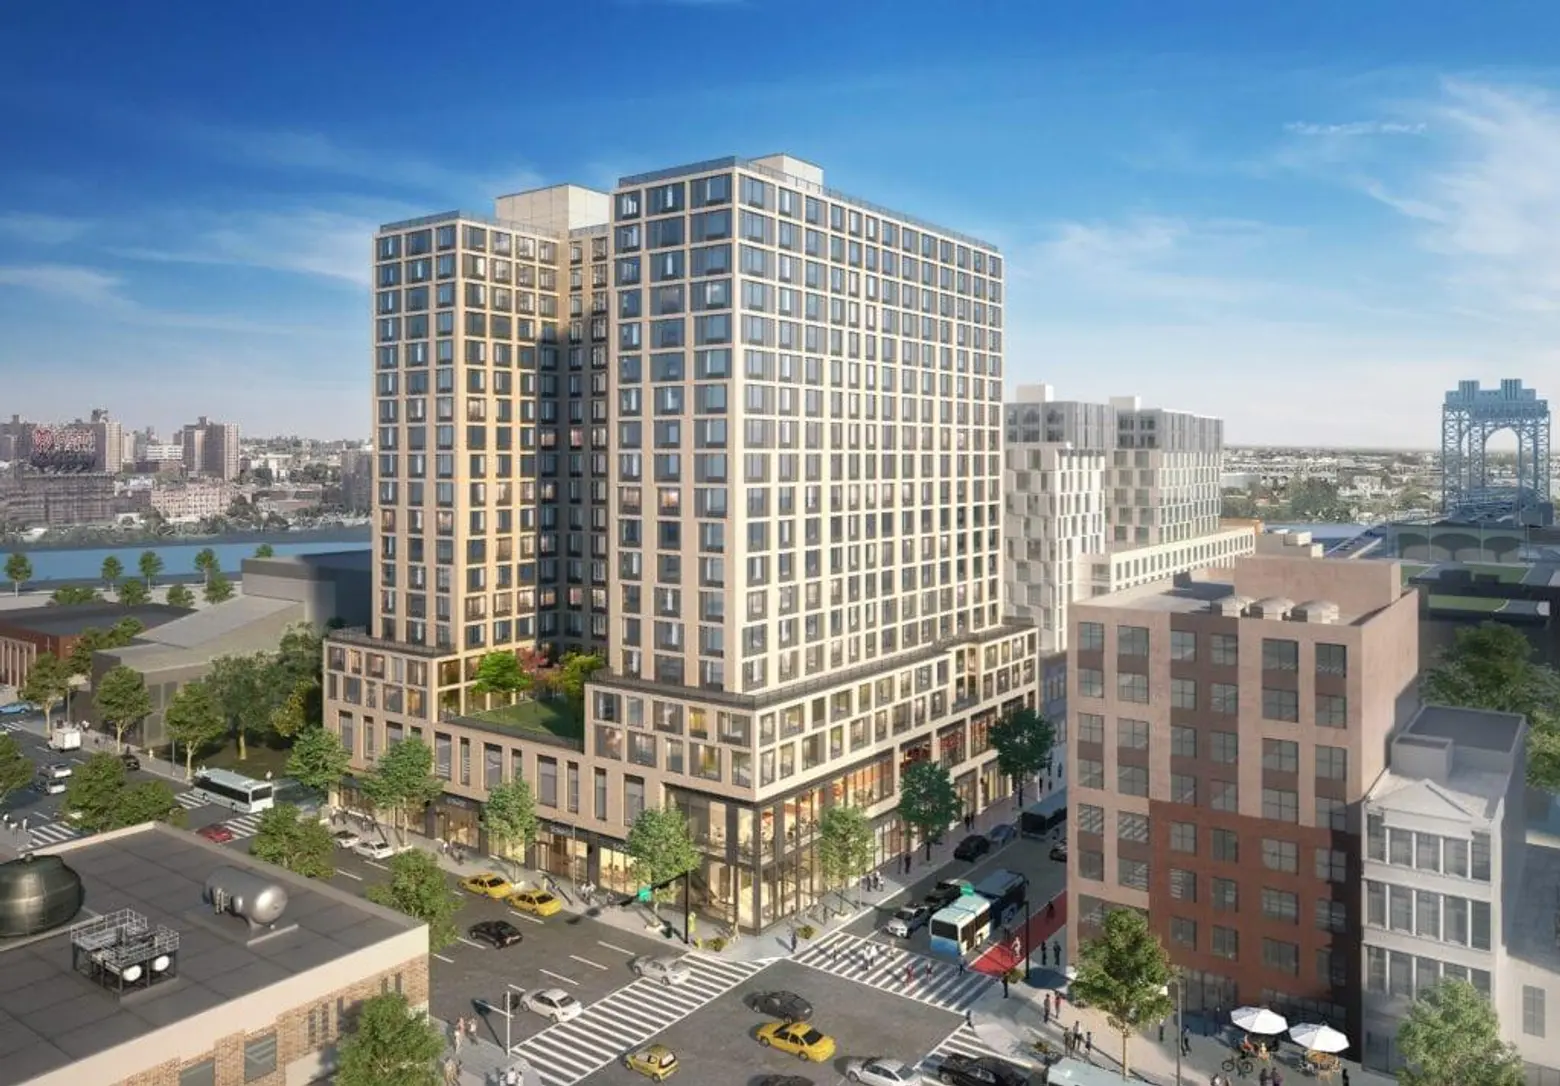 New 125th Street project will bring 300 affordable apartments to East Harlem